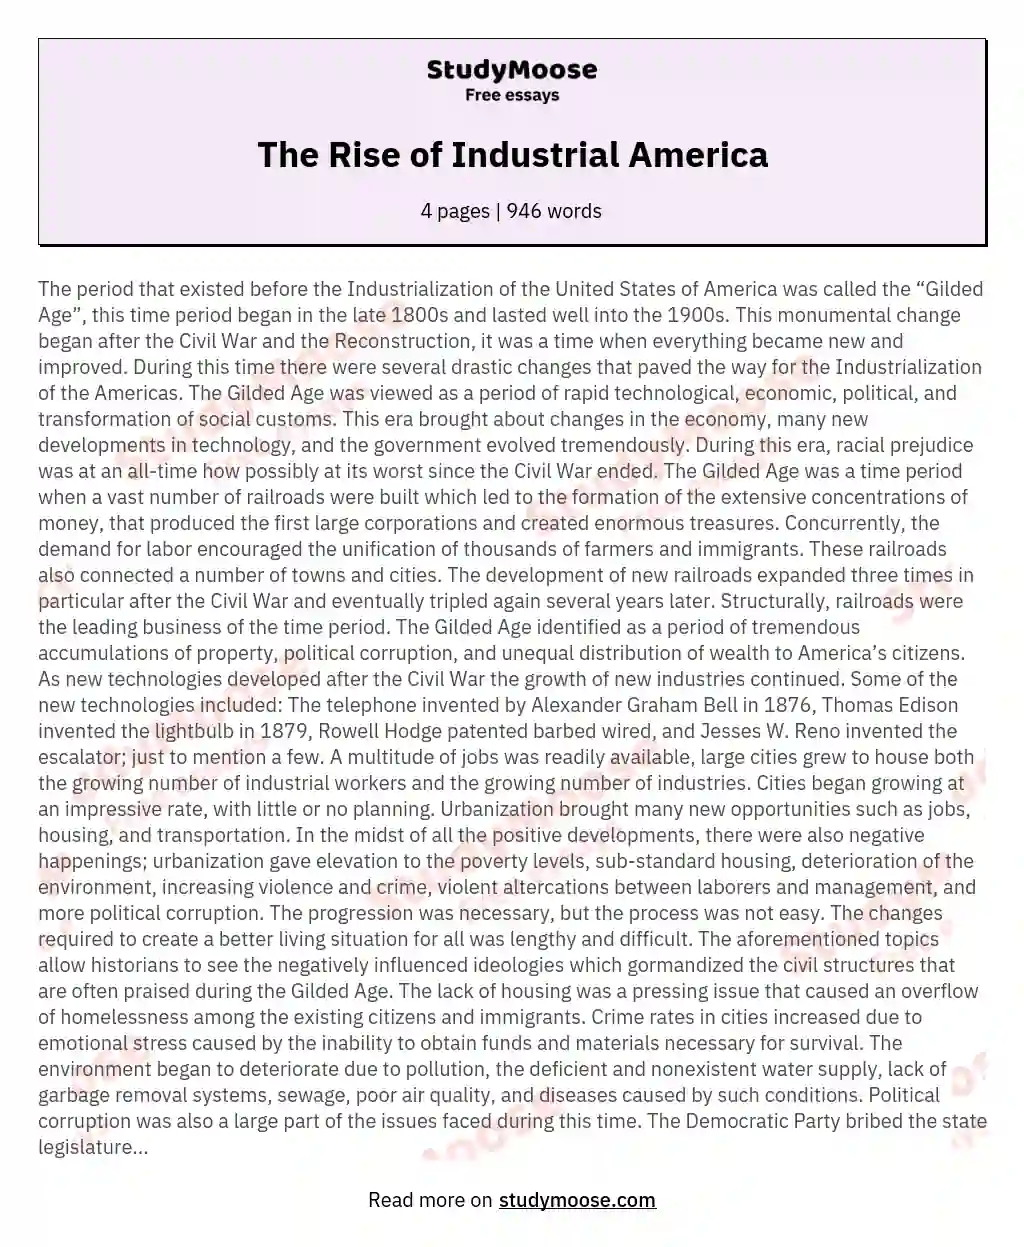 The Rise of Industrial America essay